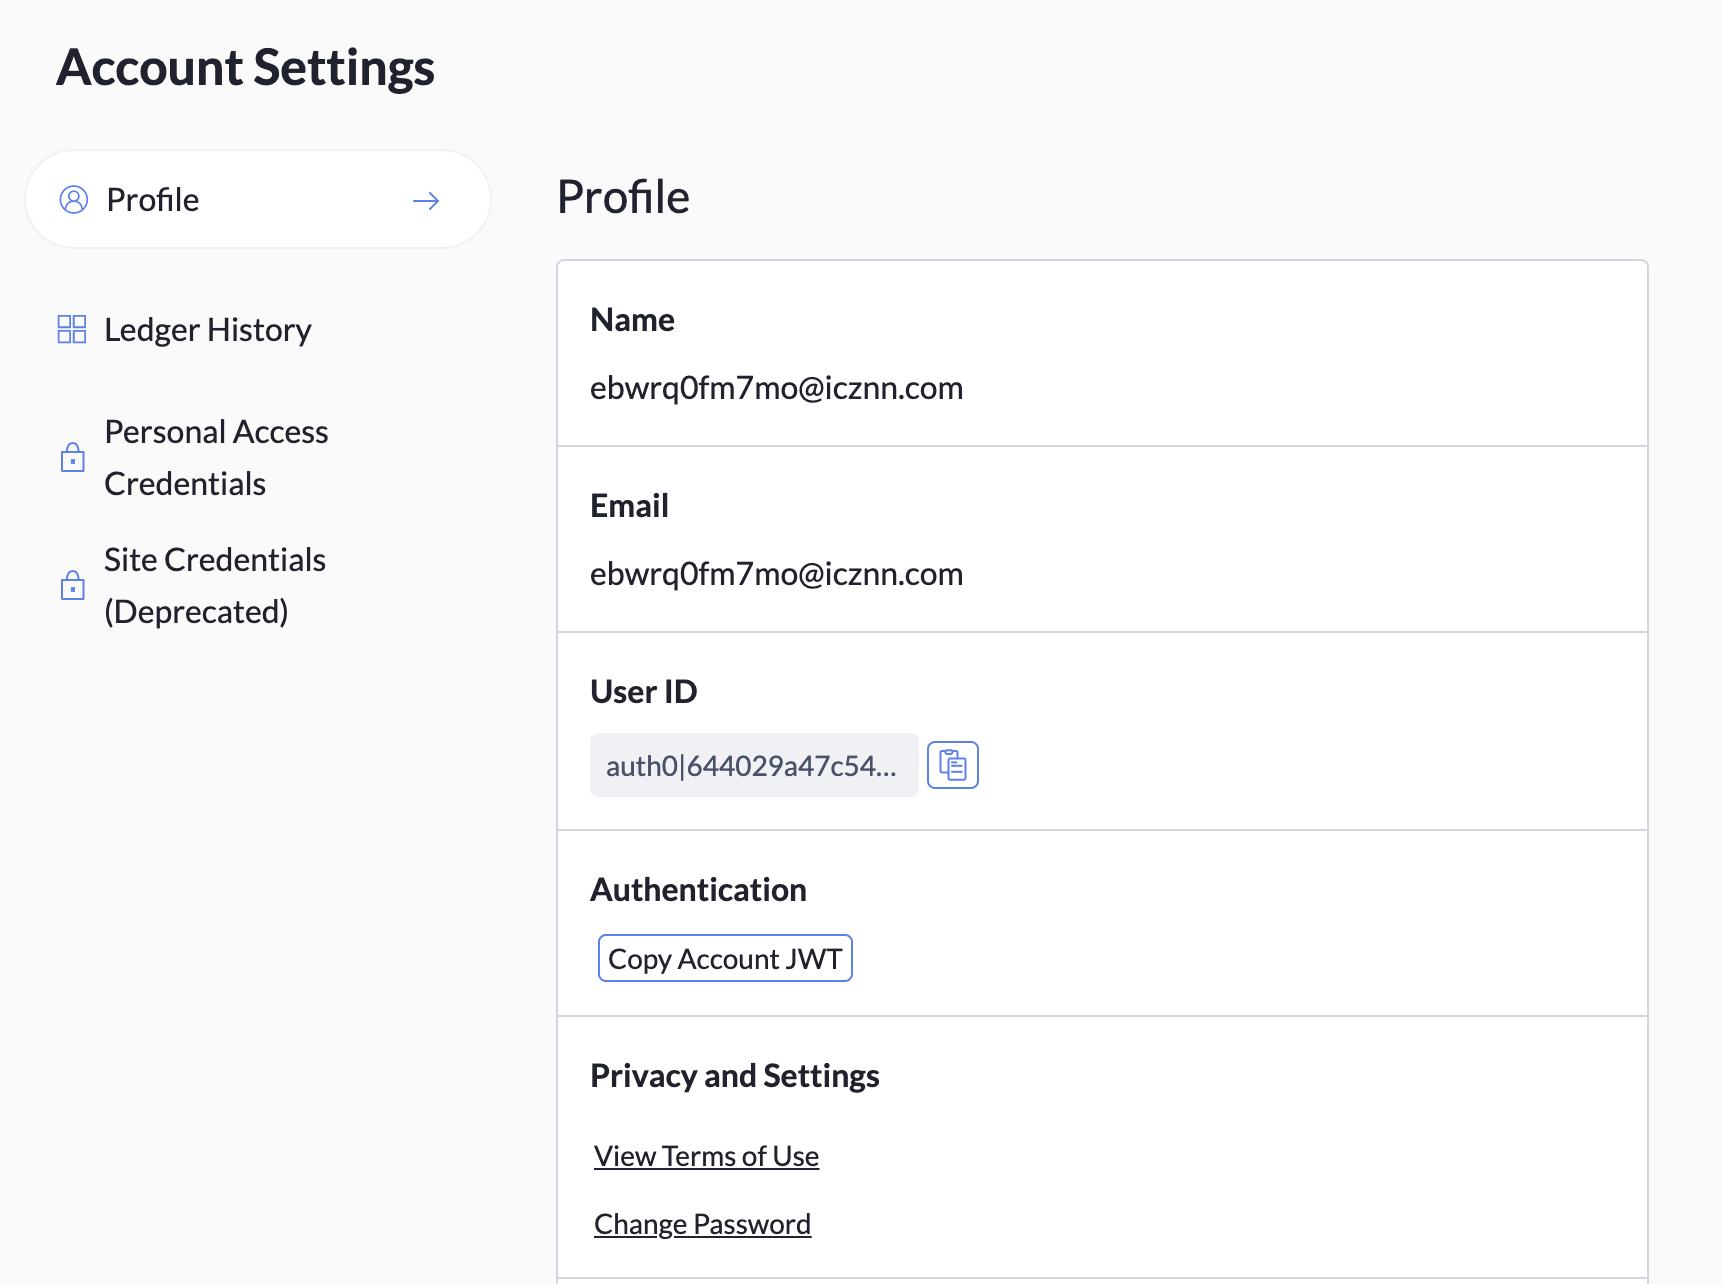 The Profile tab with the fields Name, Email, User ID, Authentication, and Privacy and Settings